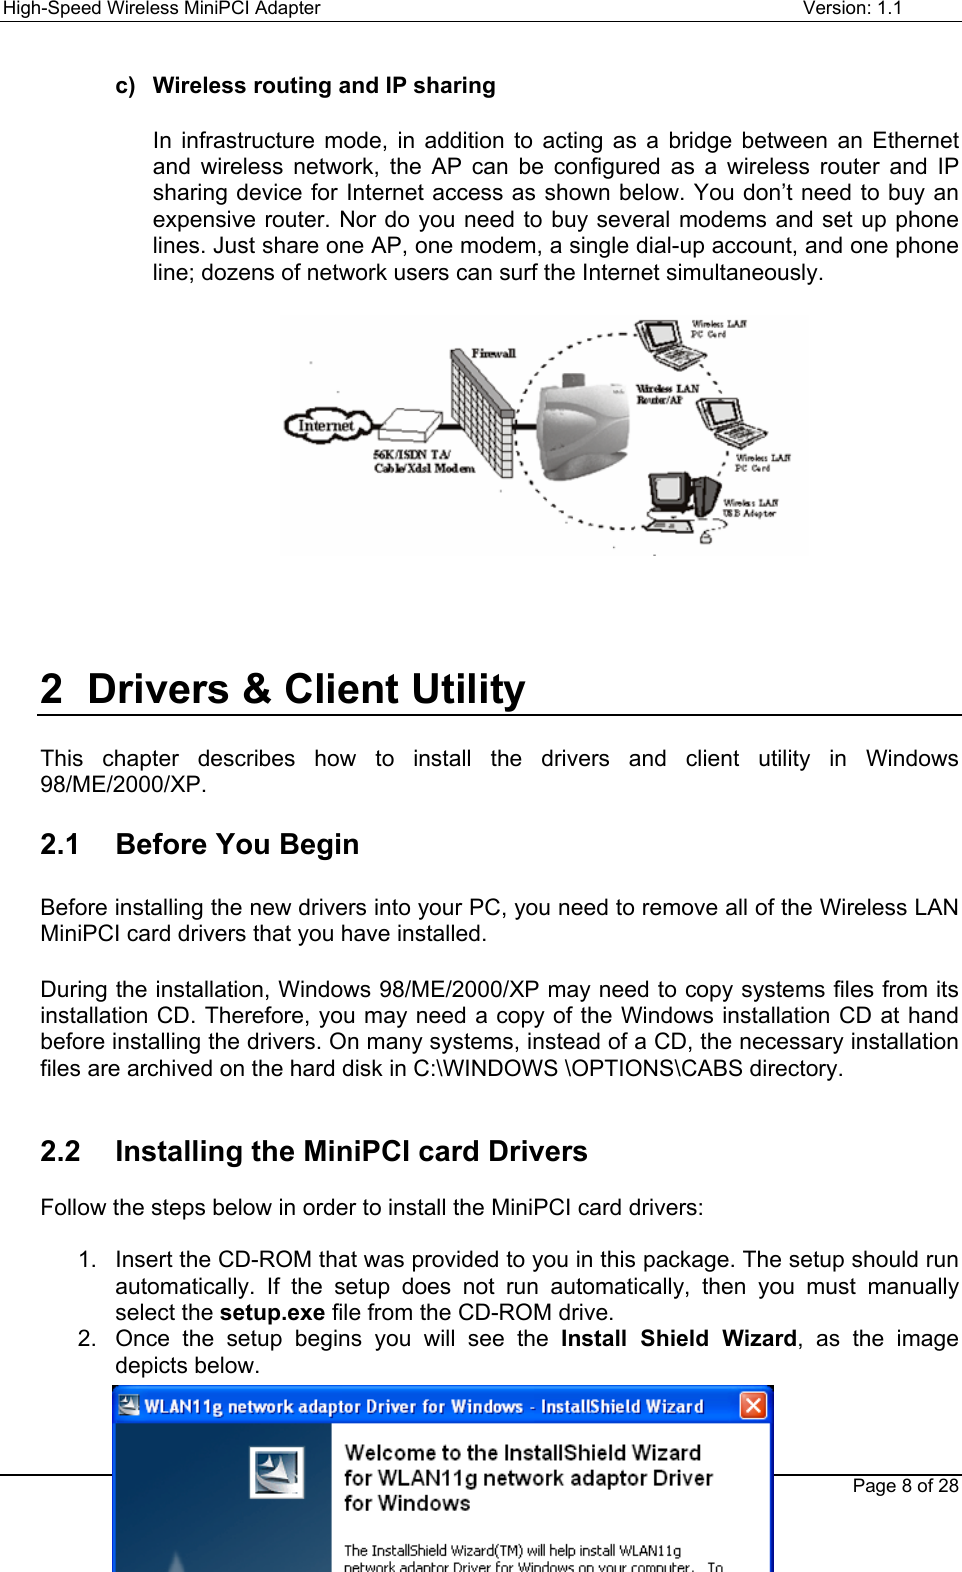 High-Speed Wireless MiniPCI Adapter Version: 1.1Page 8 of 28c)  Wireless routing and IP sharingIn infrastructure mode, in addition to acting as a bridge between an Ethernetand wireless network, the AP can be configured as a wireless router and IPsharing device for Internet access as shown below. You don’t need to buy anexpensive router. Nor do you need to buy several modems and set up phonelines. Just share one AP, one modem, a single dial-up account, and one phoneline; dozens of network users can surf the Internet simultaneously.2  Drivers &amp; Client UtilityThis chapter describes how to install the drivers and client utility in Windows98/ME/2000/XP.2.1  Before You BeginBefore installing the new drivers into your PC, you need to remove all of the Wireless LANMiniPCI card drivers that you have installed.During the installation, Windows 98/ME/2000/XP may need to copy systems files from itsinstallation CD. Therefore, you may need a copy of the Windows installation CD at handbefore installing the drivers. On many systems, instead of a CD, the necessary installationfiles are archived on the hard disk in C:\WINDOWS \OPTIONS\CABS directory.2.2  Installing the MiniPCI card DriversFollow the steps below in order to install the MiniPCI card drivers:1.  Insert the CD-ROM that was provided to you in this package. The setup should runautomatically. If the setup does not run automatically, then you must manuallyselect the setup.exe file from the CD-ROM drive.2.  Once the setup begins you will see the Install Shield Wizard, as the imagedepicts below.